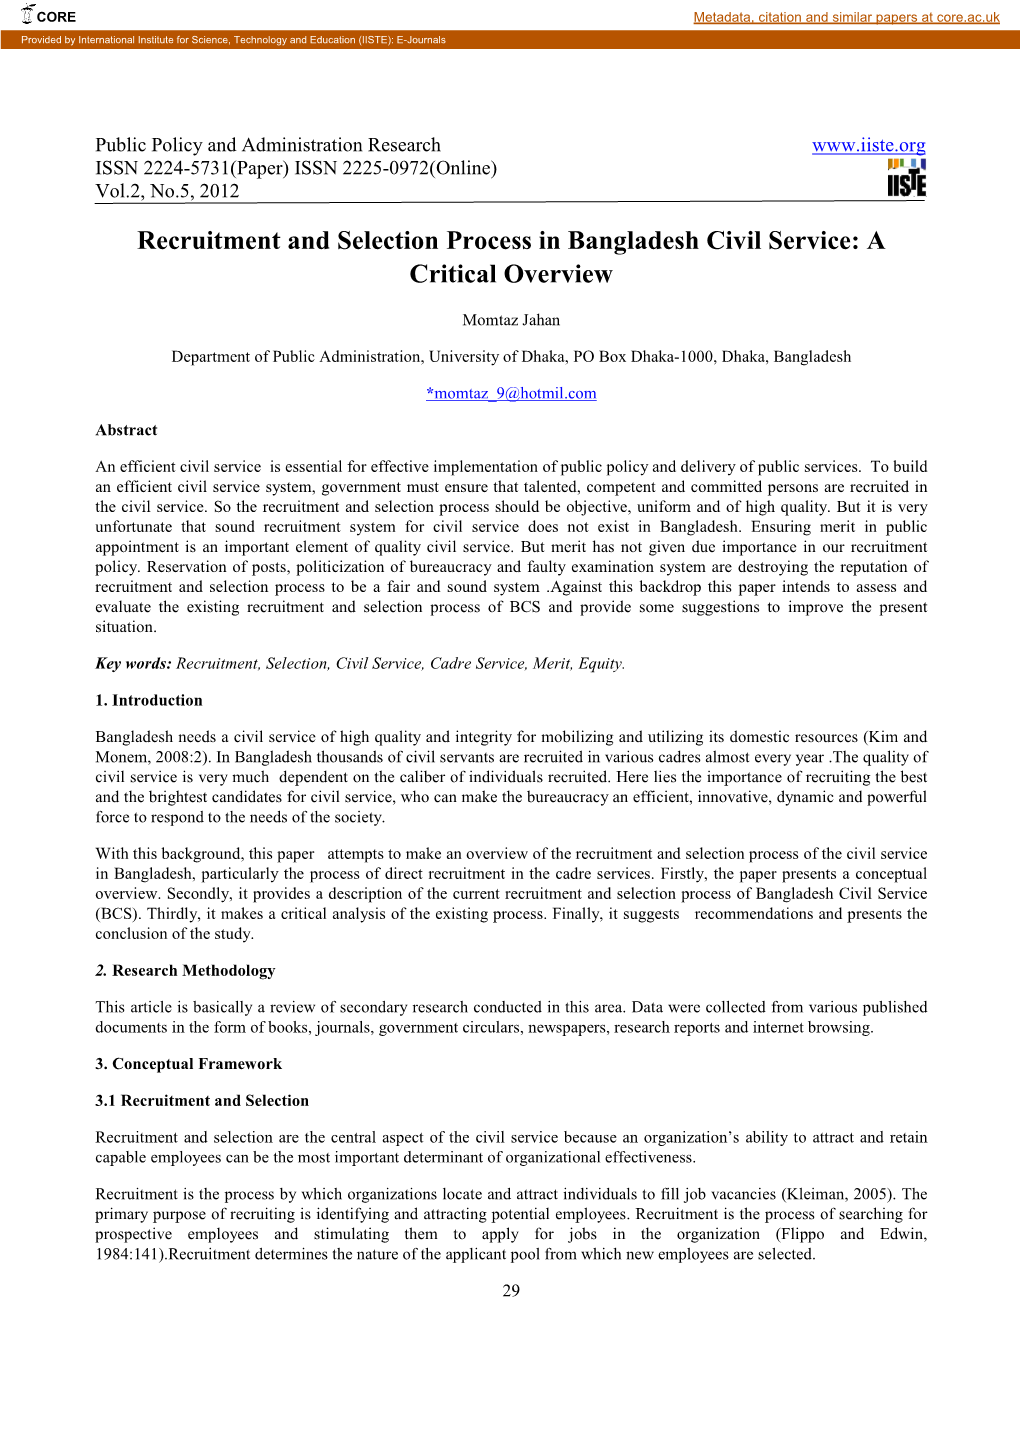 Recruitment and Selection Process in Bangladesh Civil Service: a Critical Overview